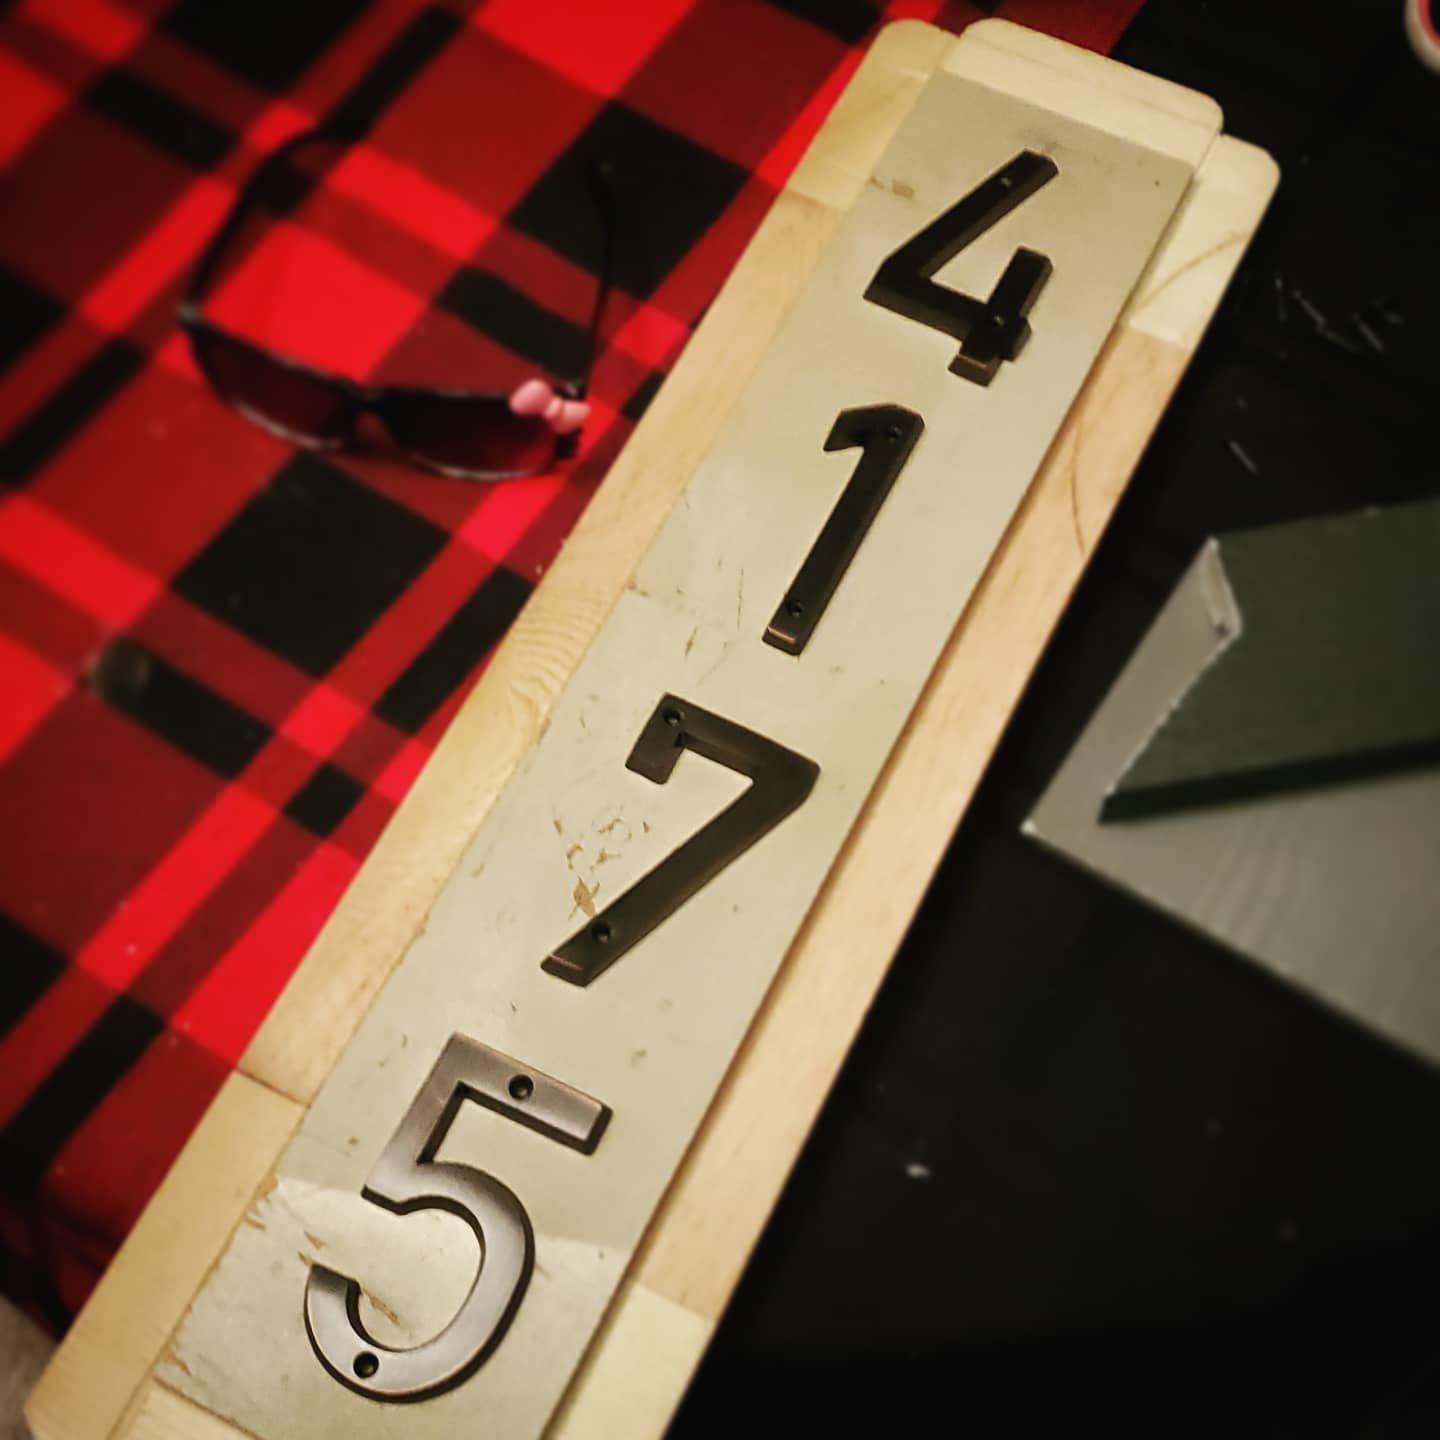 A photo of a house number sign in process of being constructed, but not painted